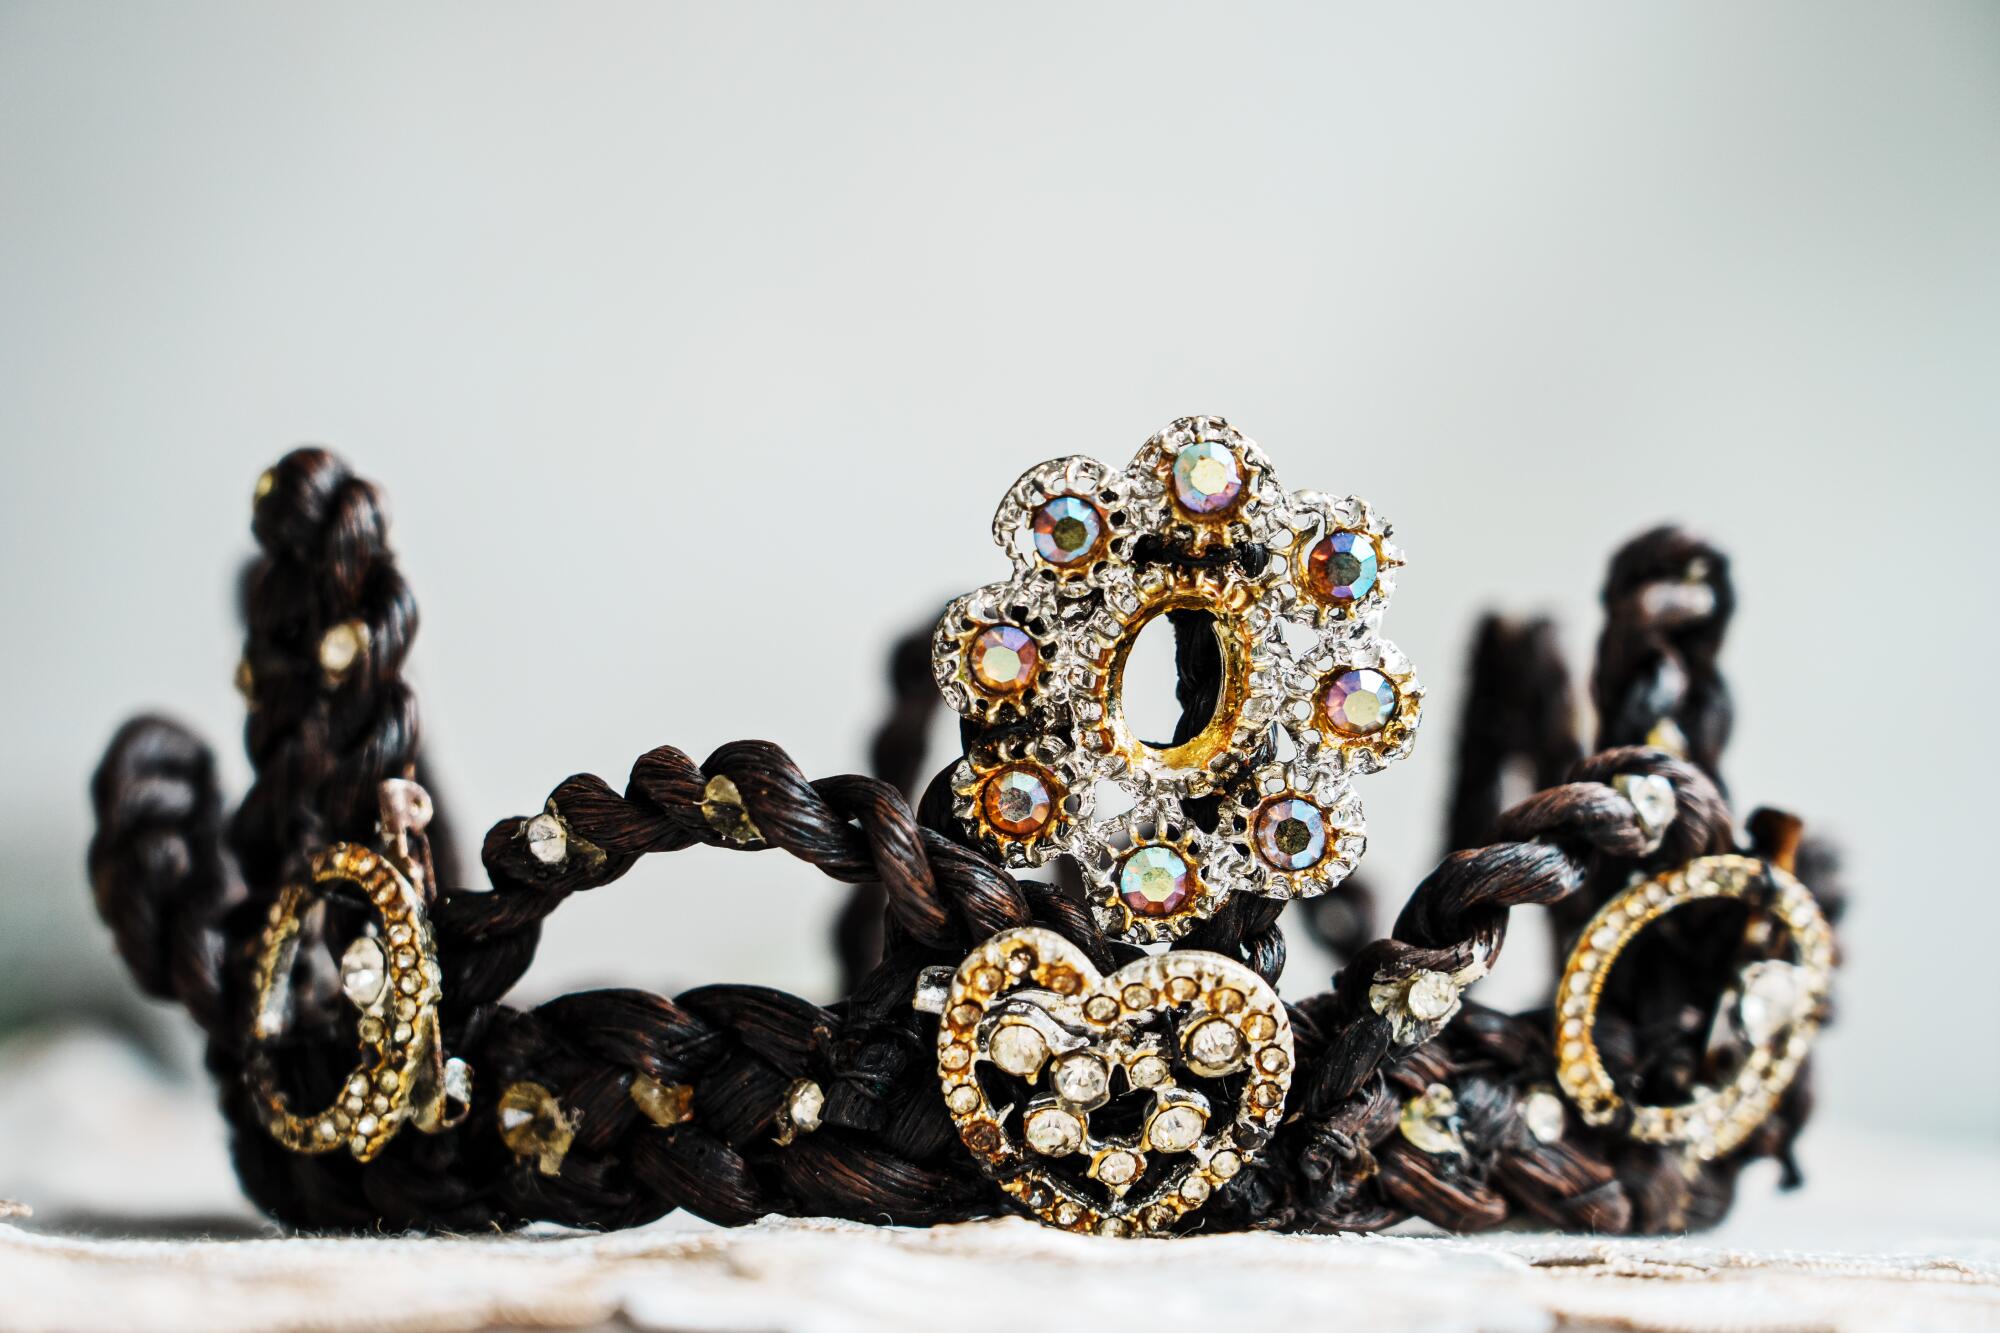 A crown of woven vanilla pods embellished with hearts and jewels.